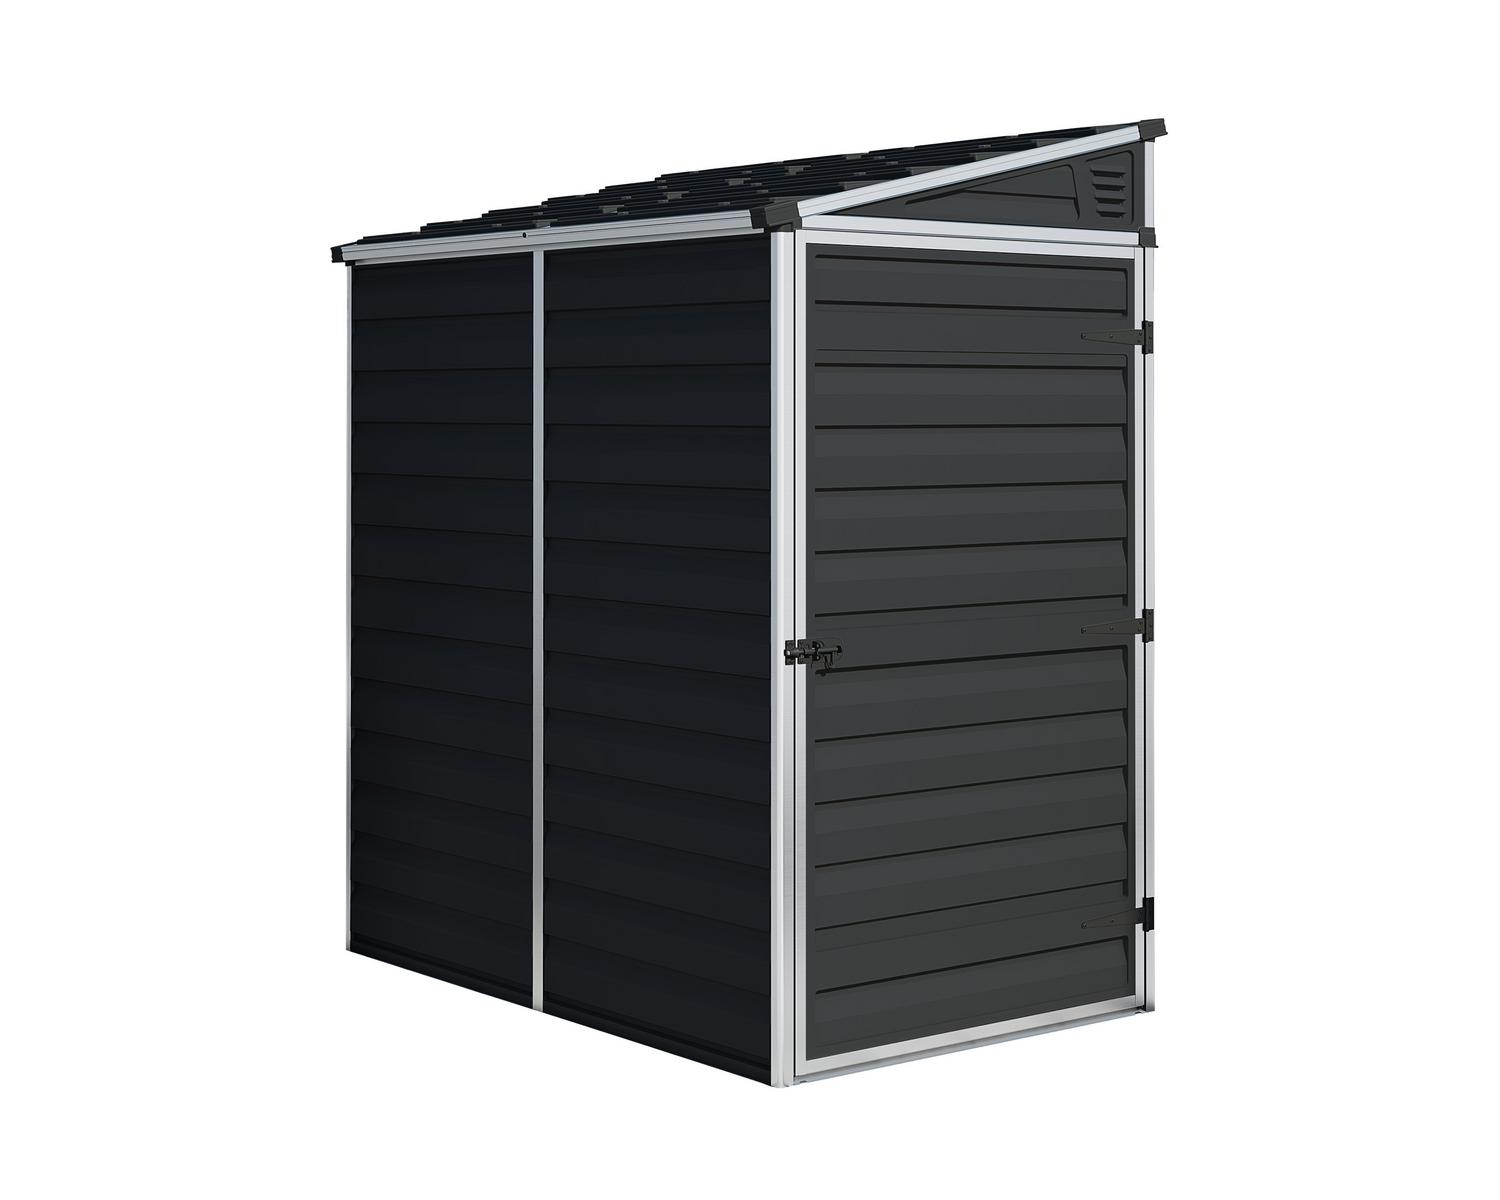 Pent 4 ft. x 6 ft. Plastic Storage Shed with Dark Grey Polycarbonate Panels & Aluminium Frame